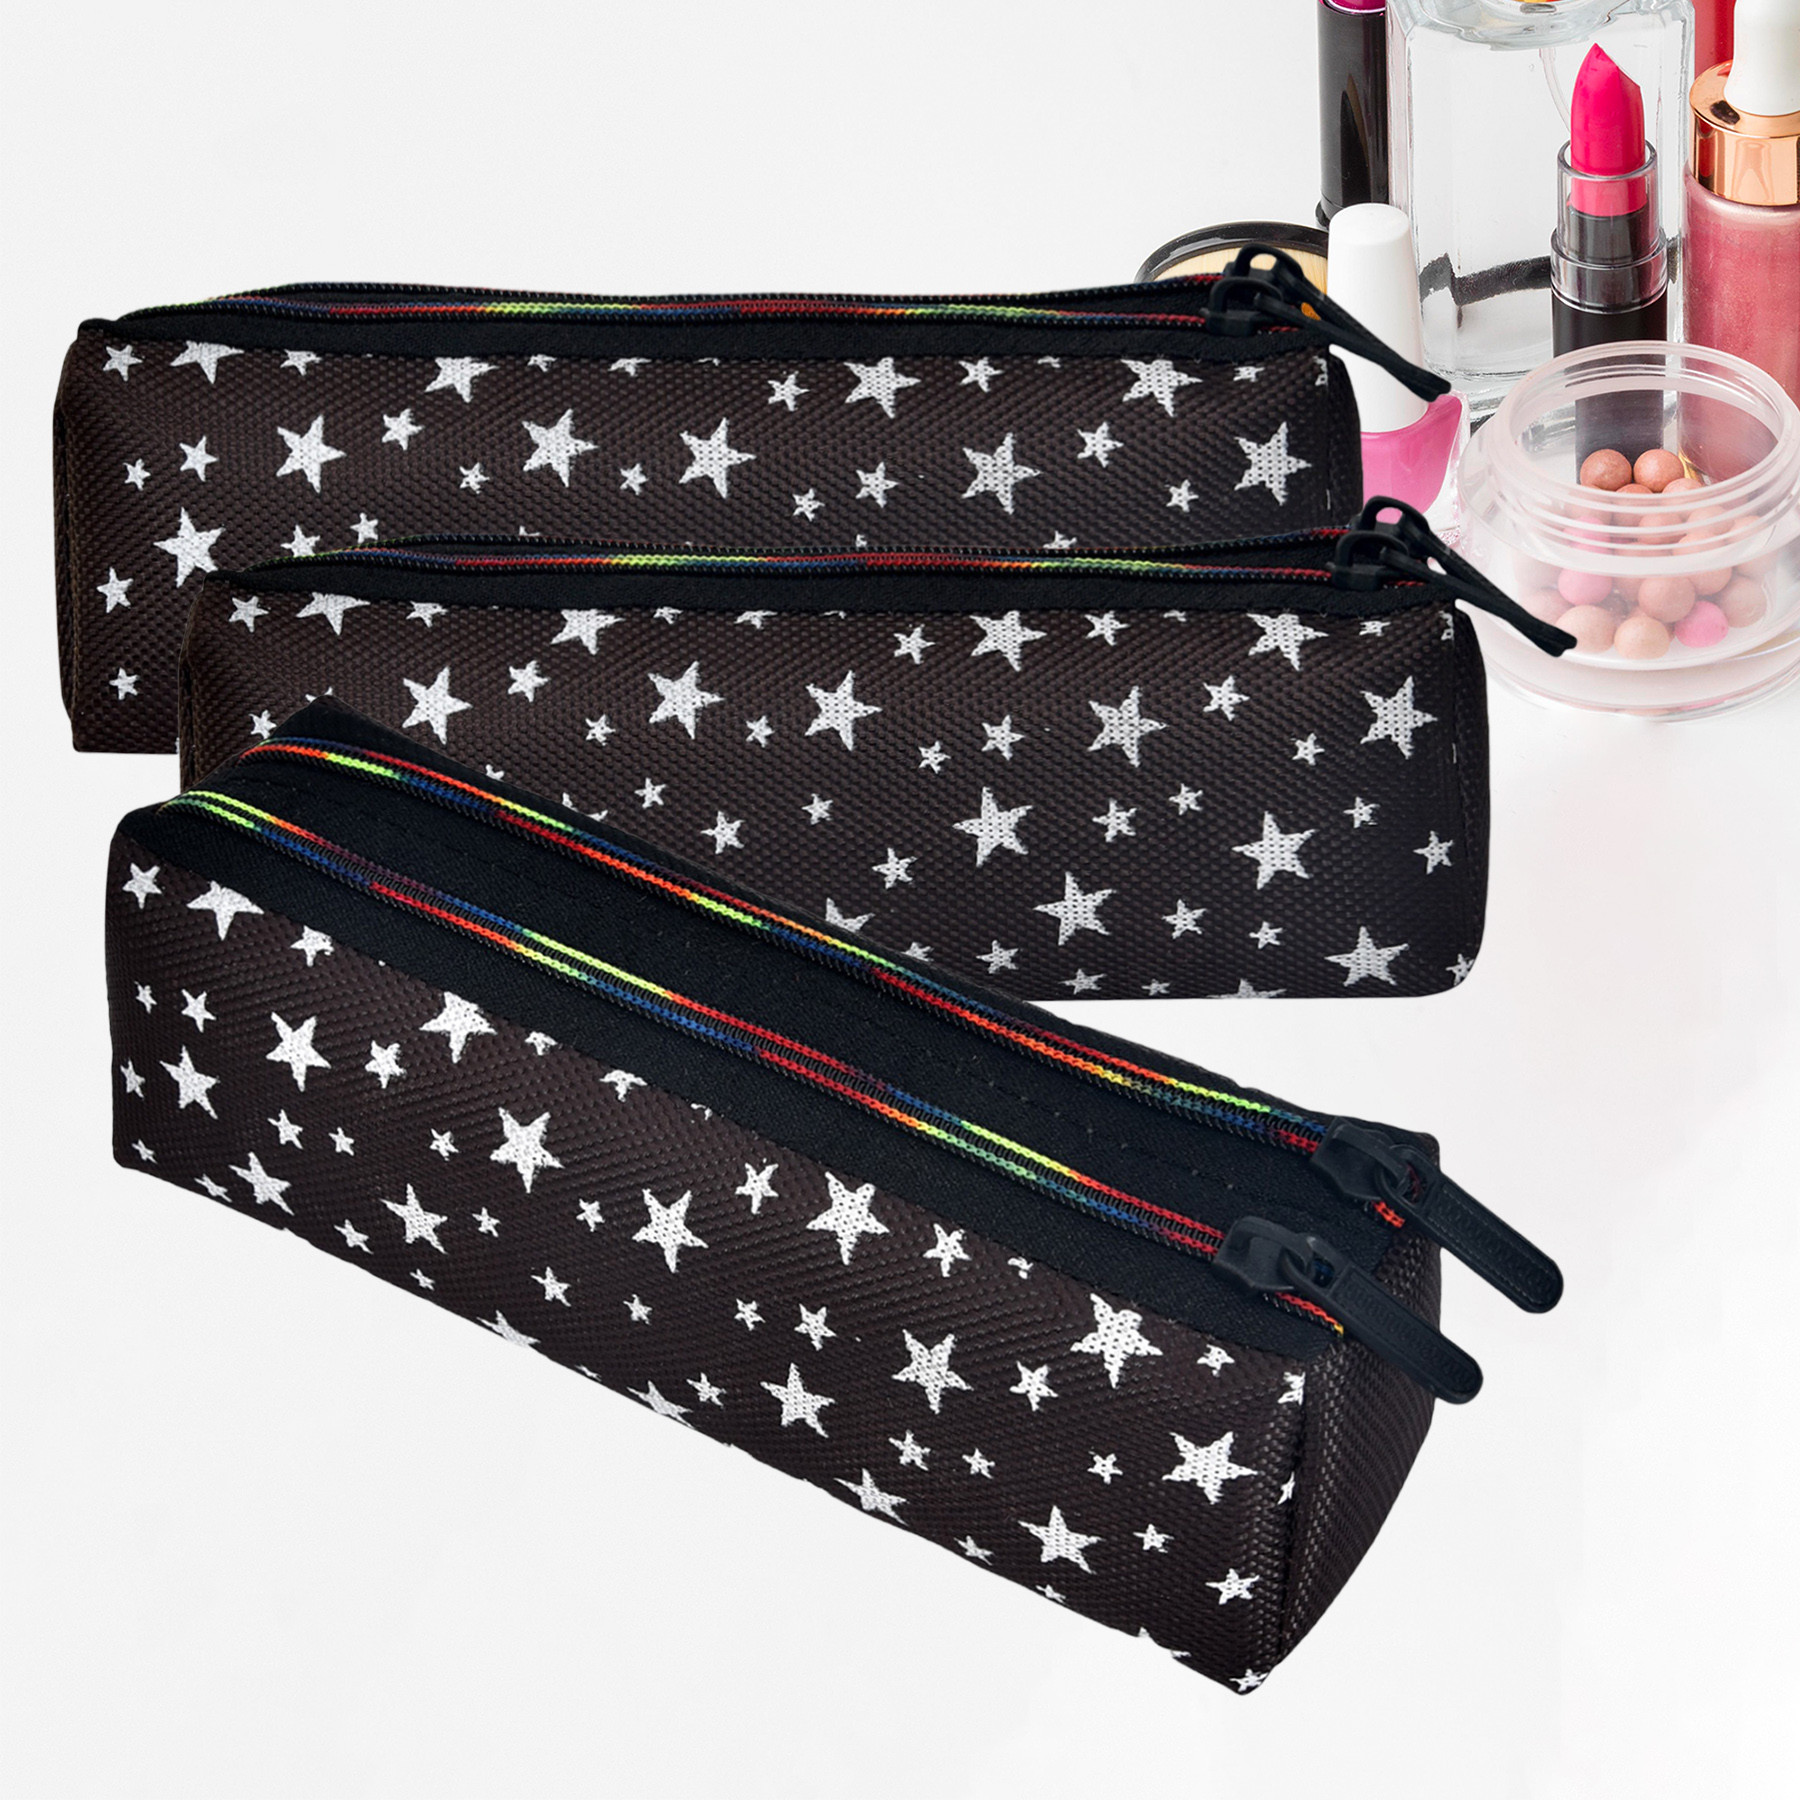 Kuber Industries Makeup Pouch | Rexine Cosmetic Pouch | Jewellery Utility Pouch | Toiletry Pouch for Girls | Travel Makeup Pouch for Girls | Storage Makeup Bag | Star Makeup Pouch |Black